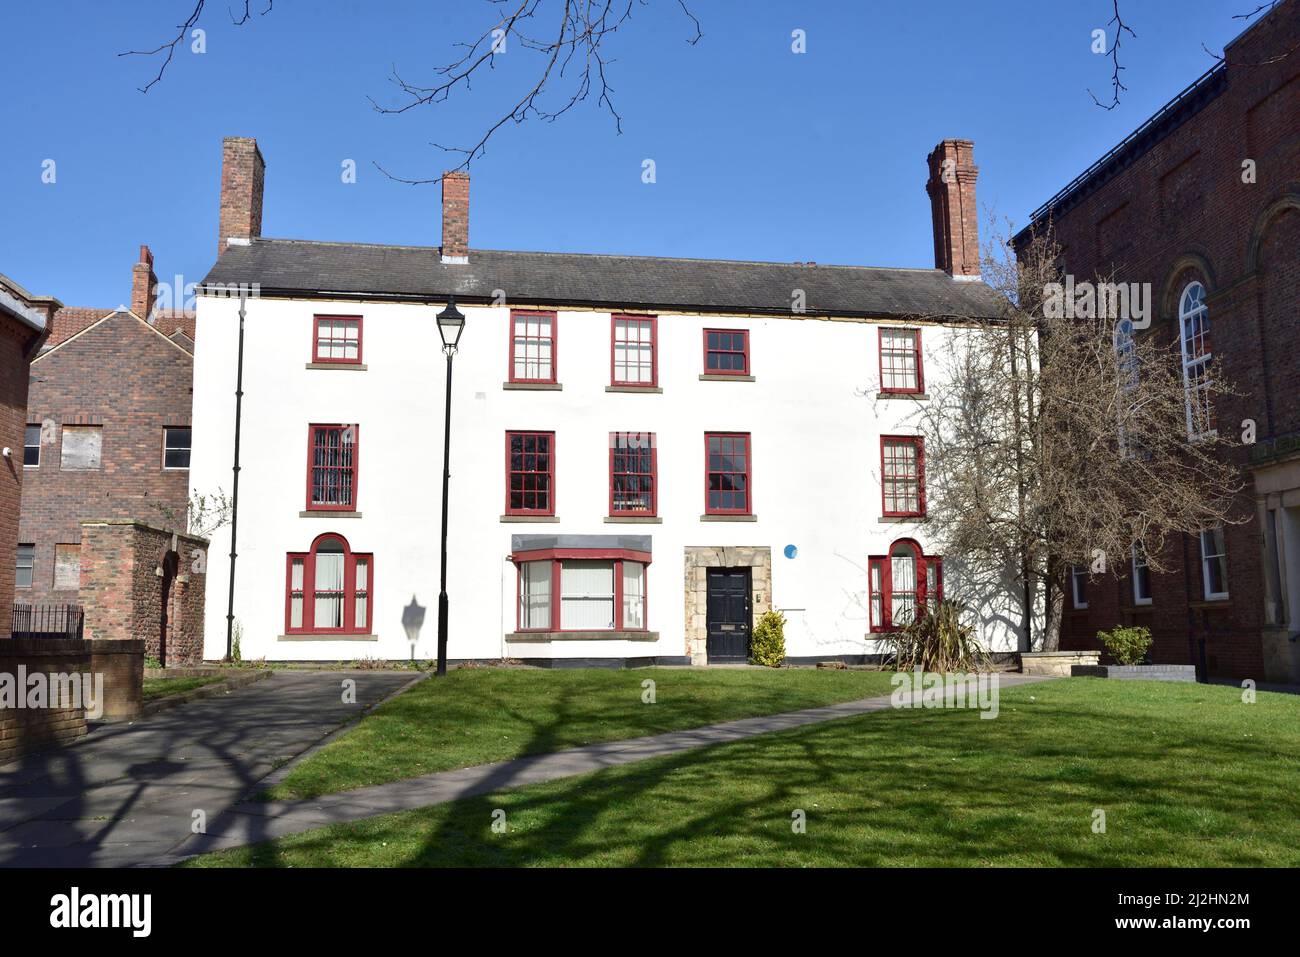 Pease's House, Darlington. It was the home of Edward Pease, promoter of the Stockton and Darlington Railway. Stock Photo